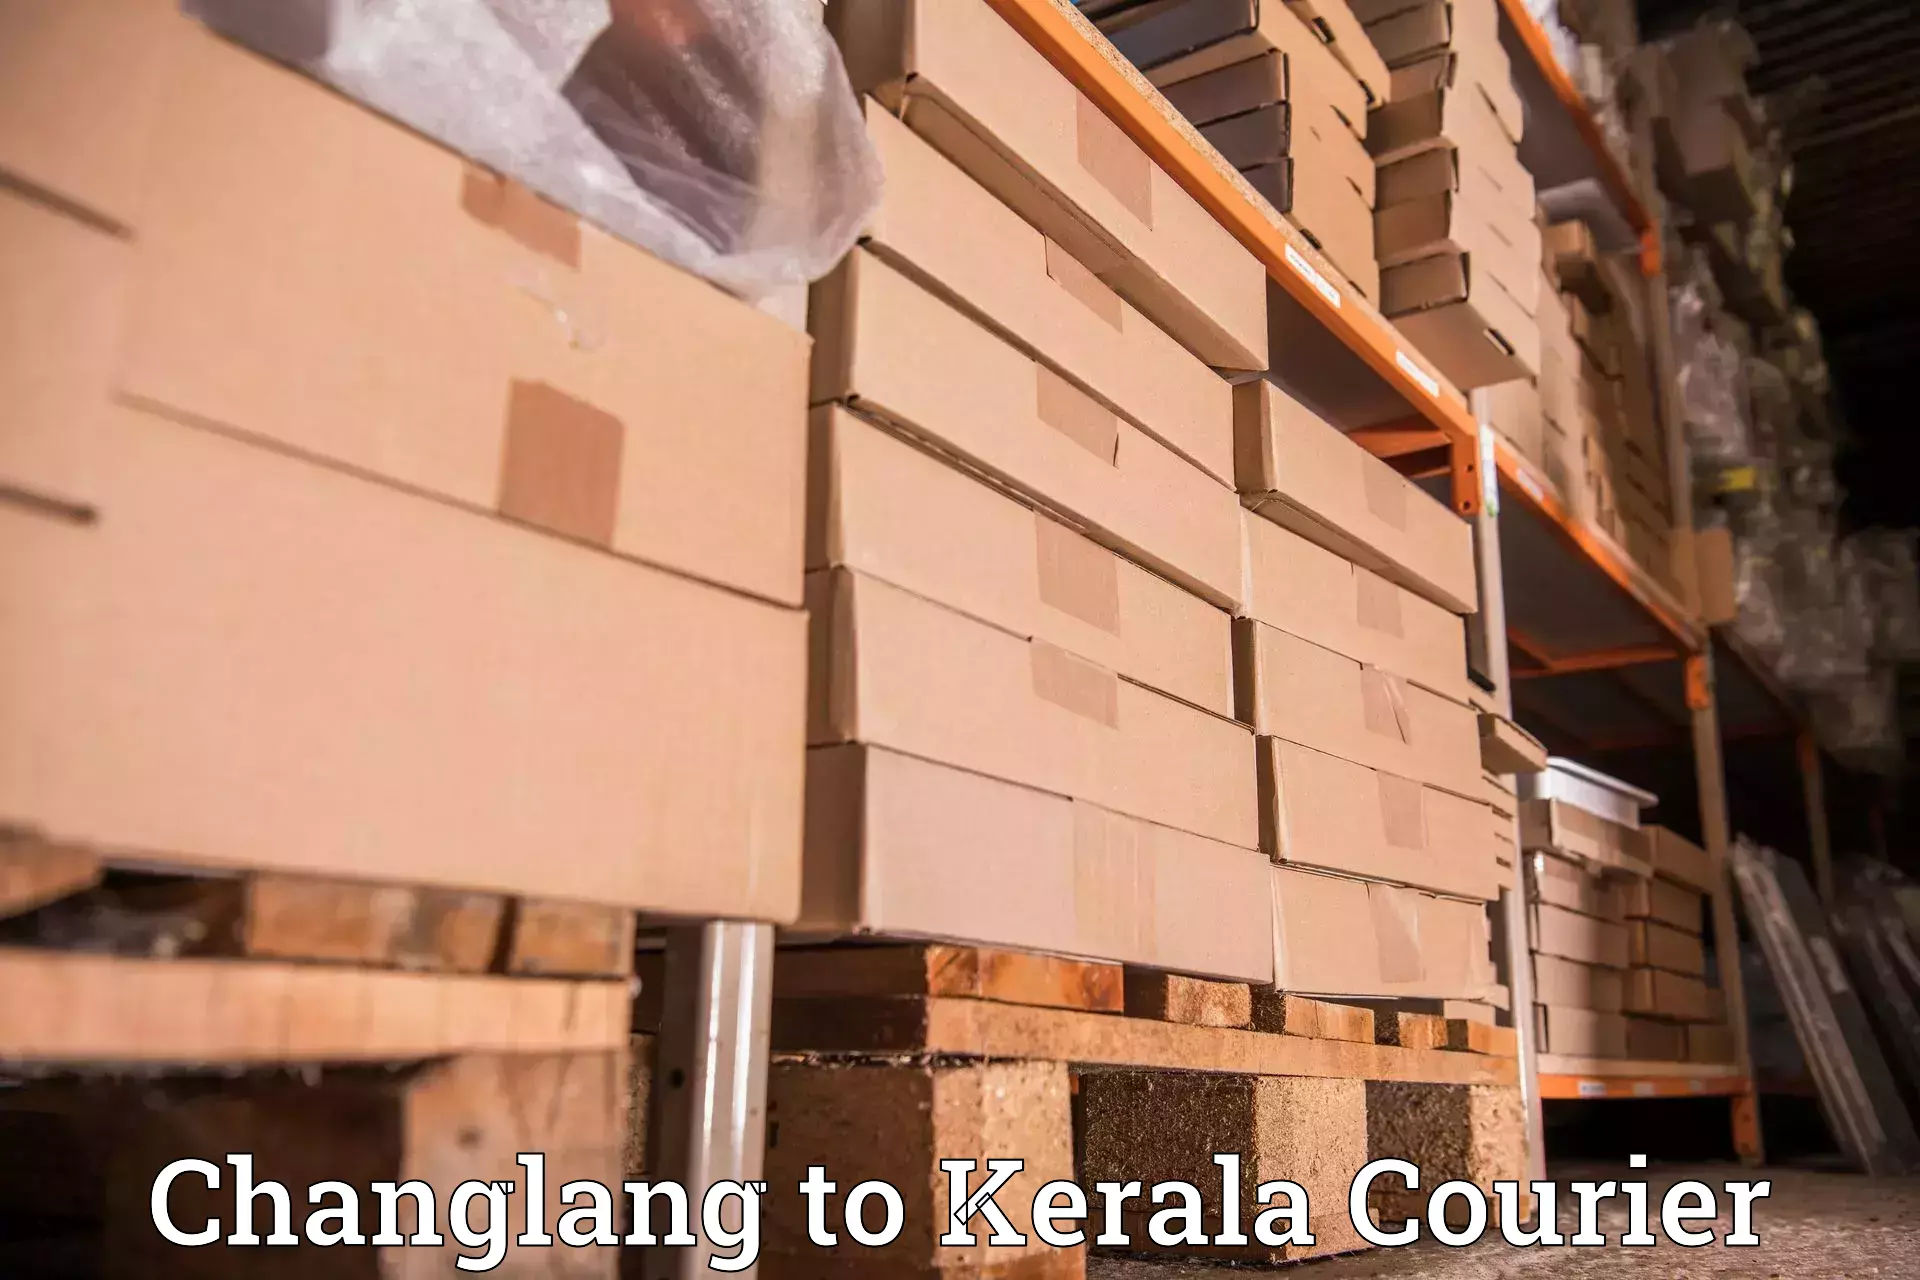 Courier service comparison Changlang to Mananthavady